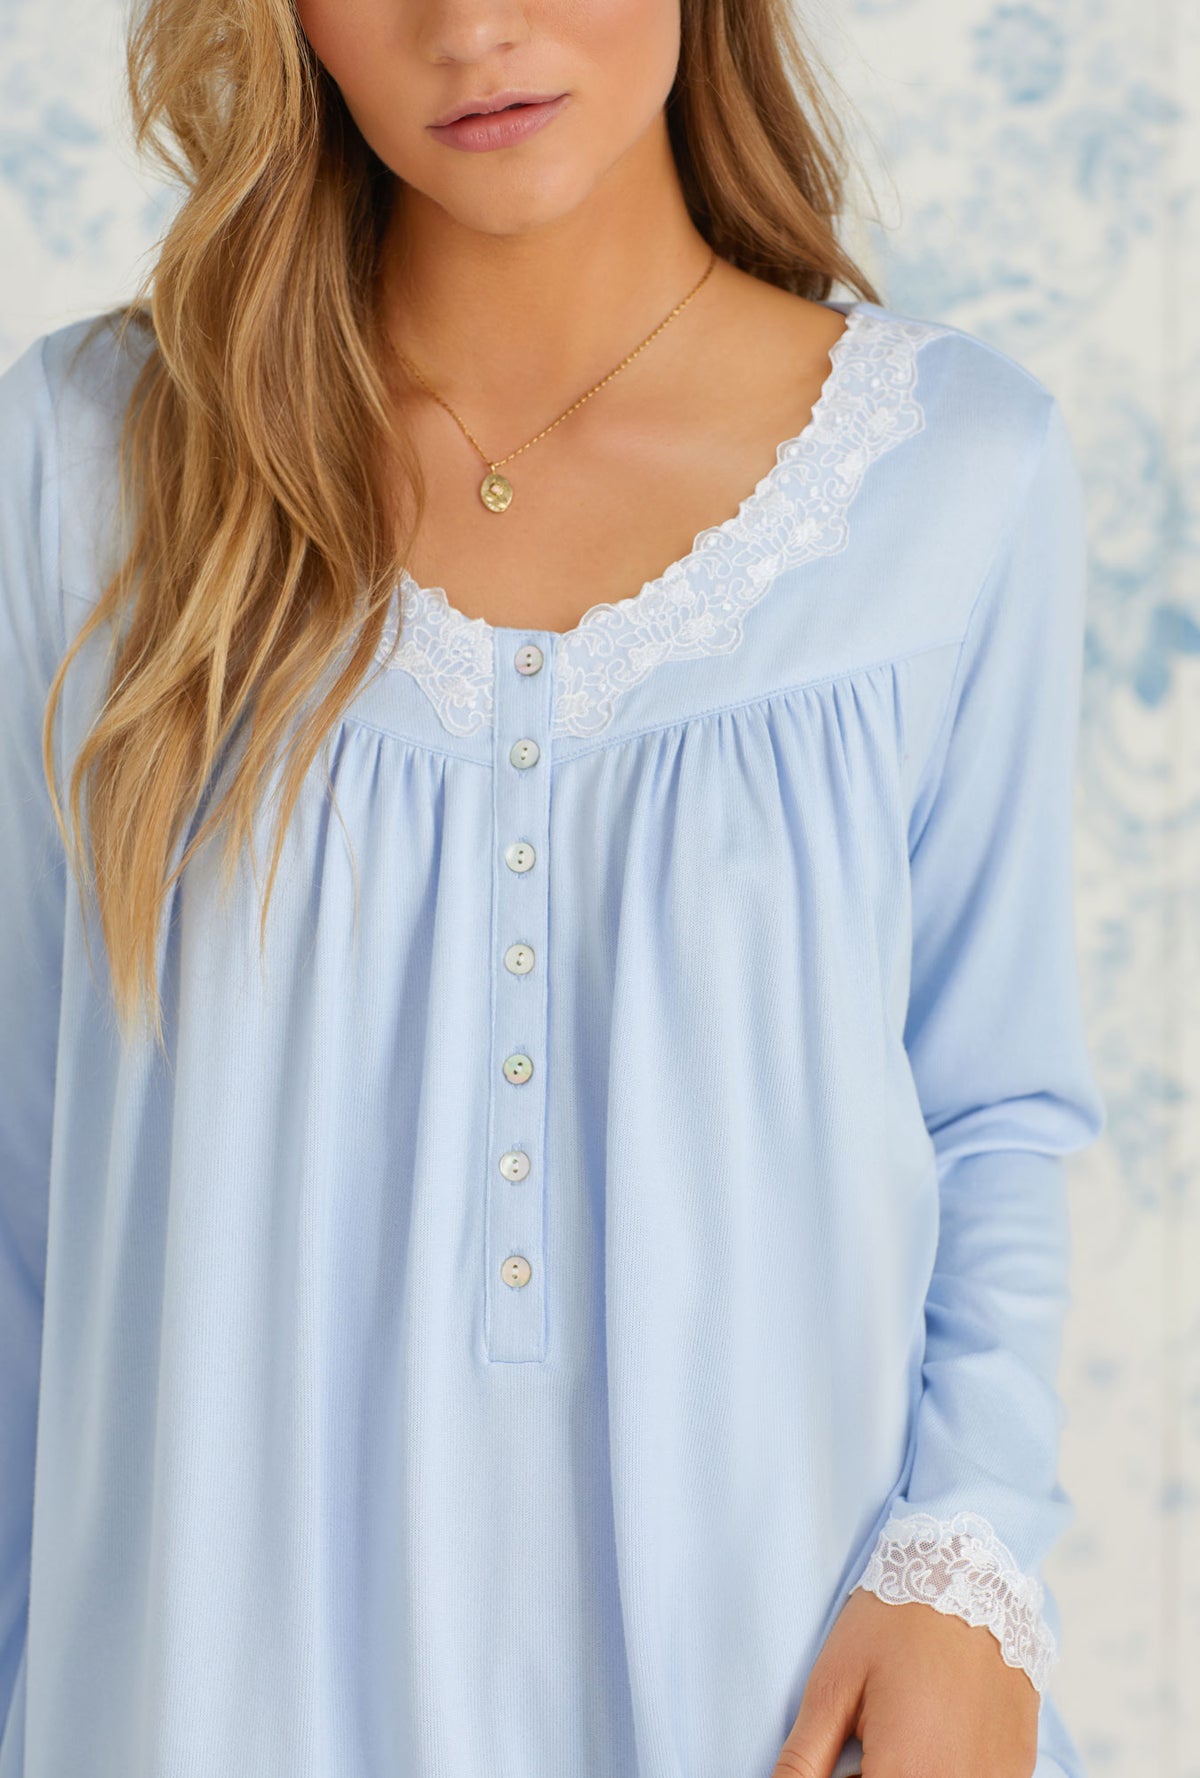 A lady wearing long sleeve blue cozy sweater knit short nightgown.